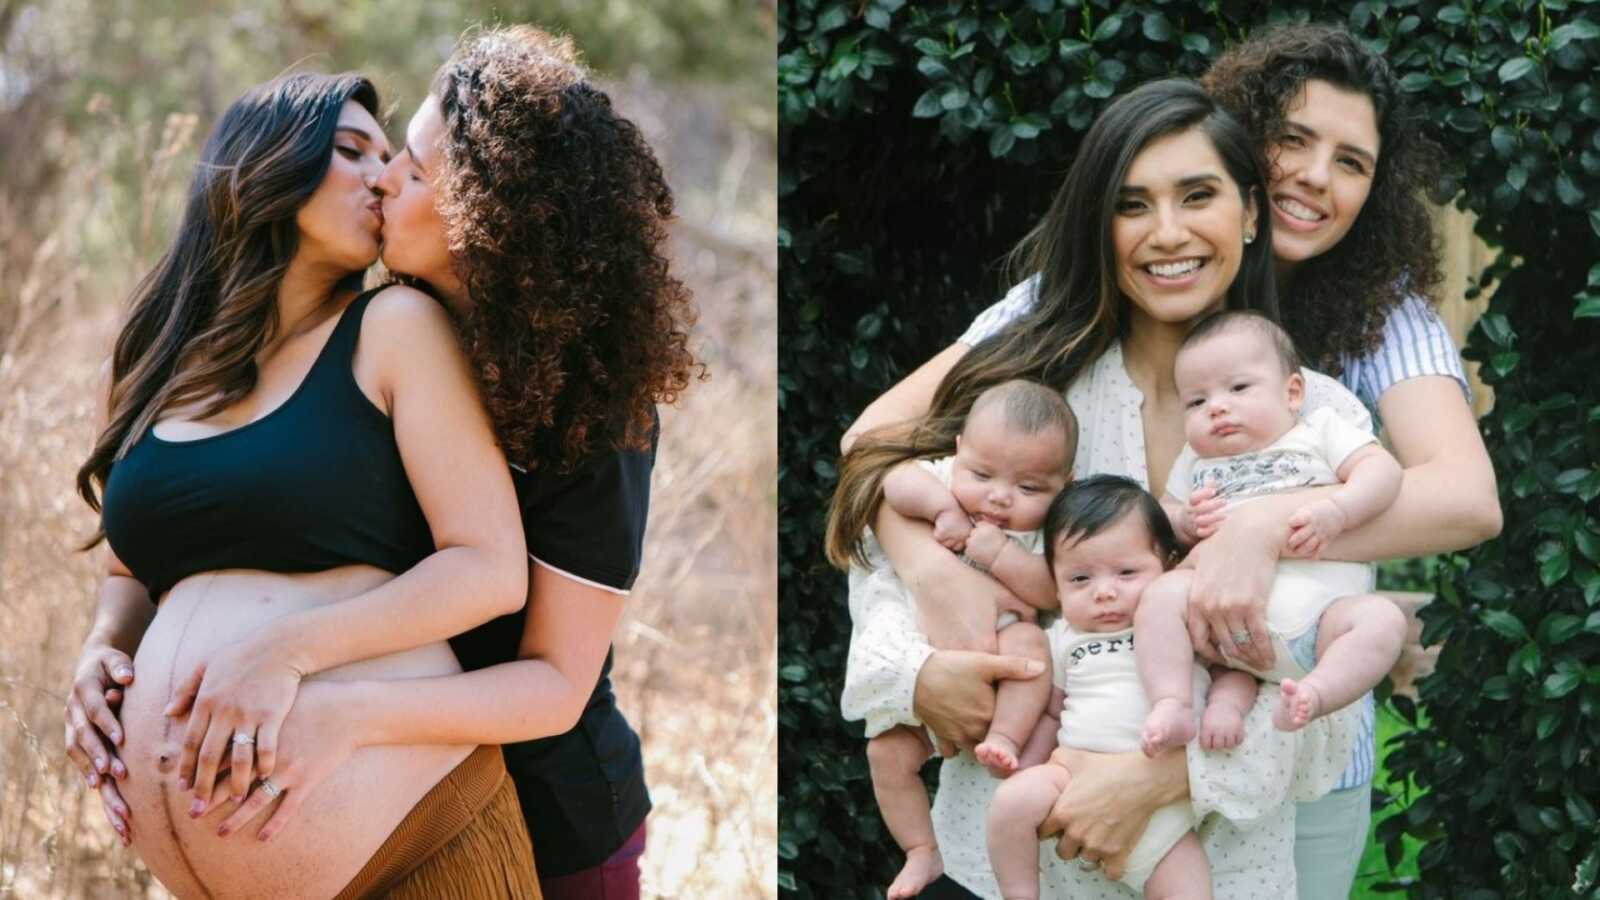 In left picture, two women kiss during their maternity photoshoot, in the right picture, same women hold their triplets for a family photo